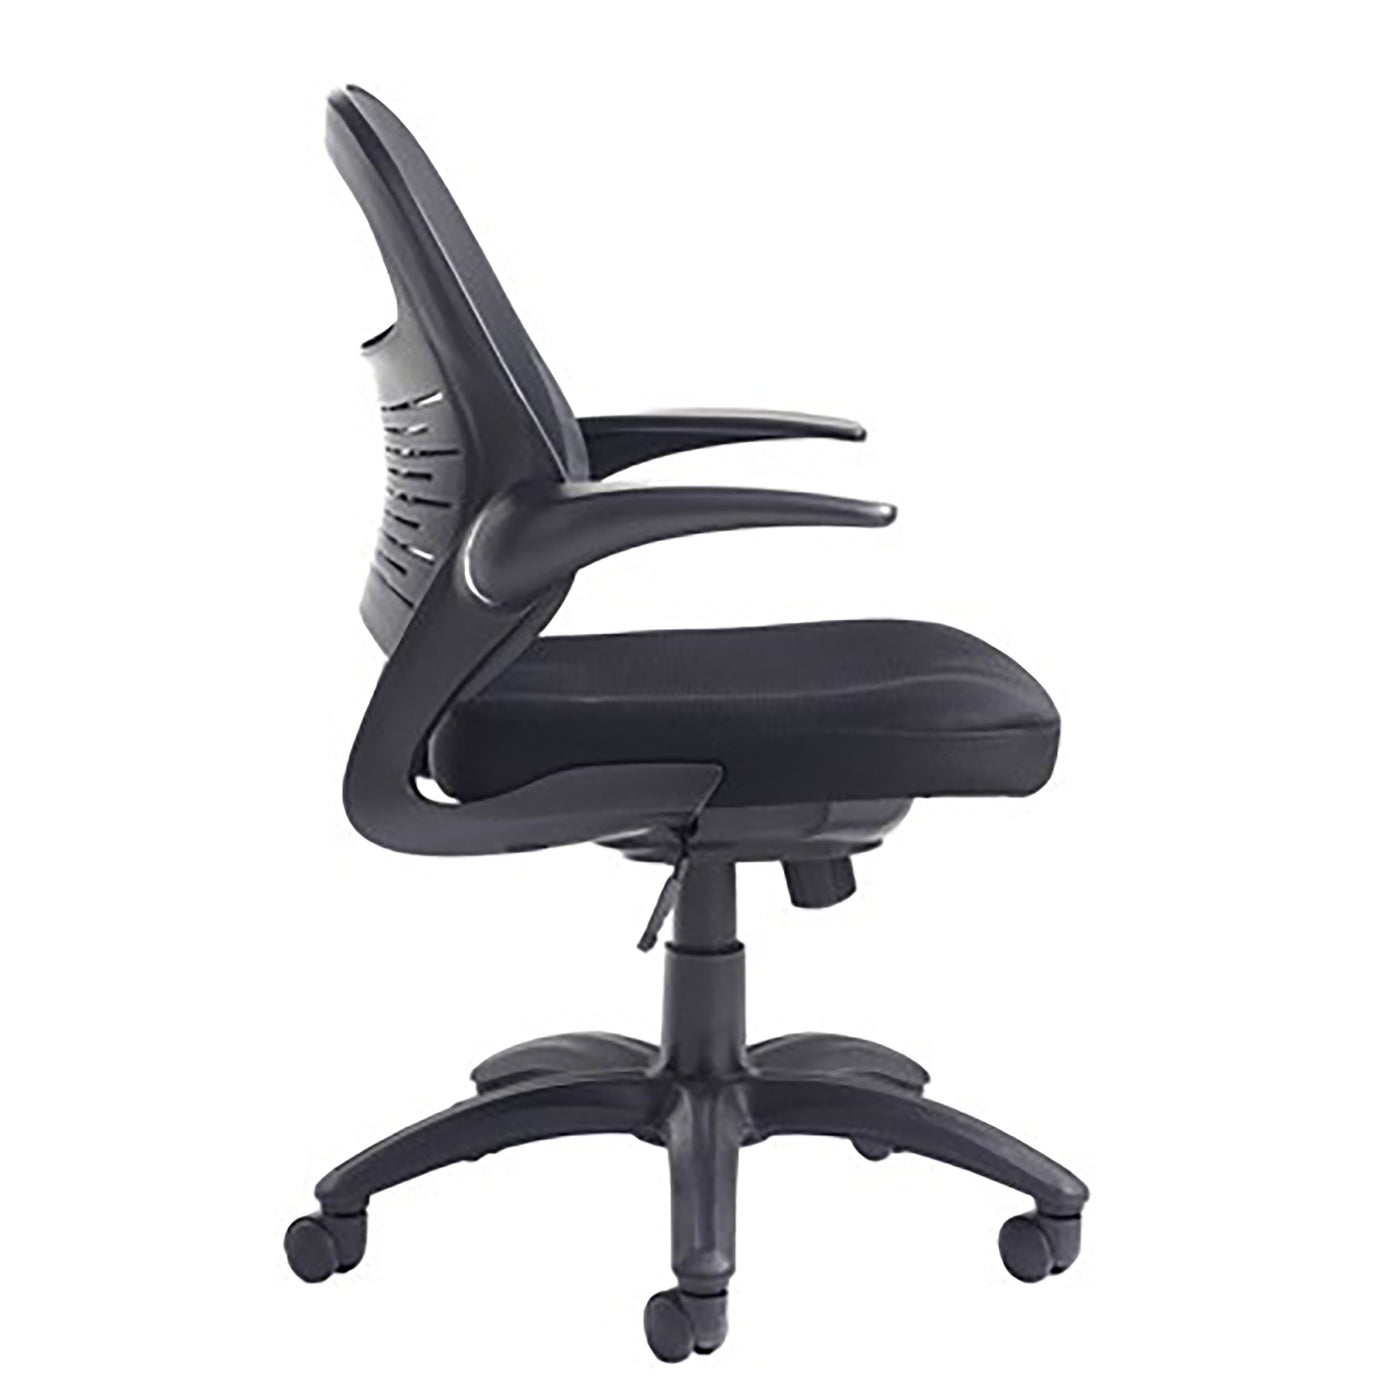 Orion Home Office Chair | Ergonomic Home Office Chair 